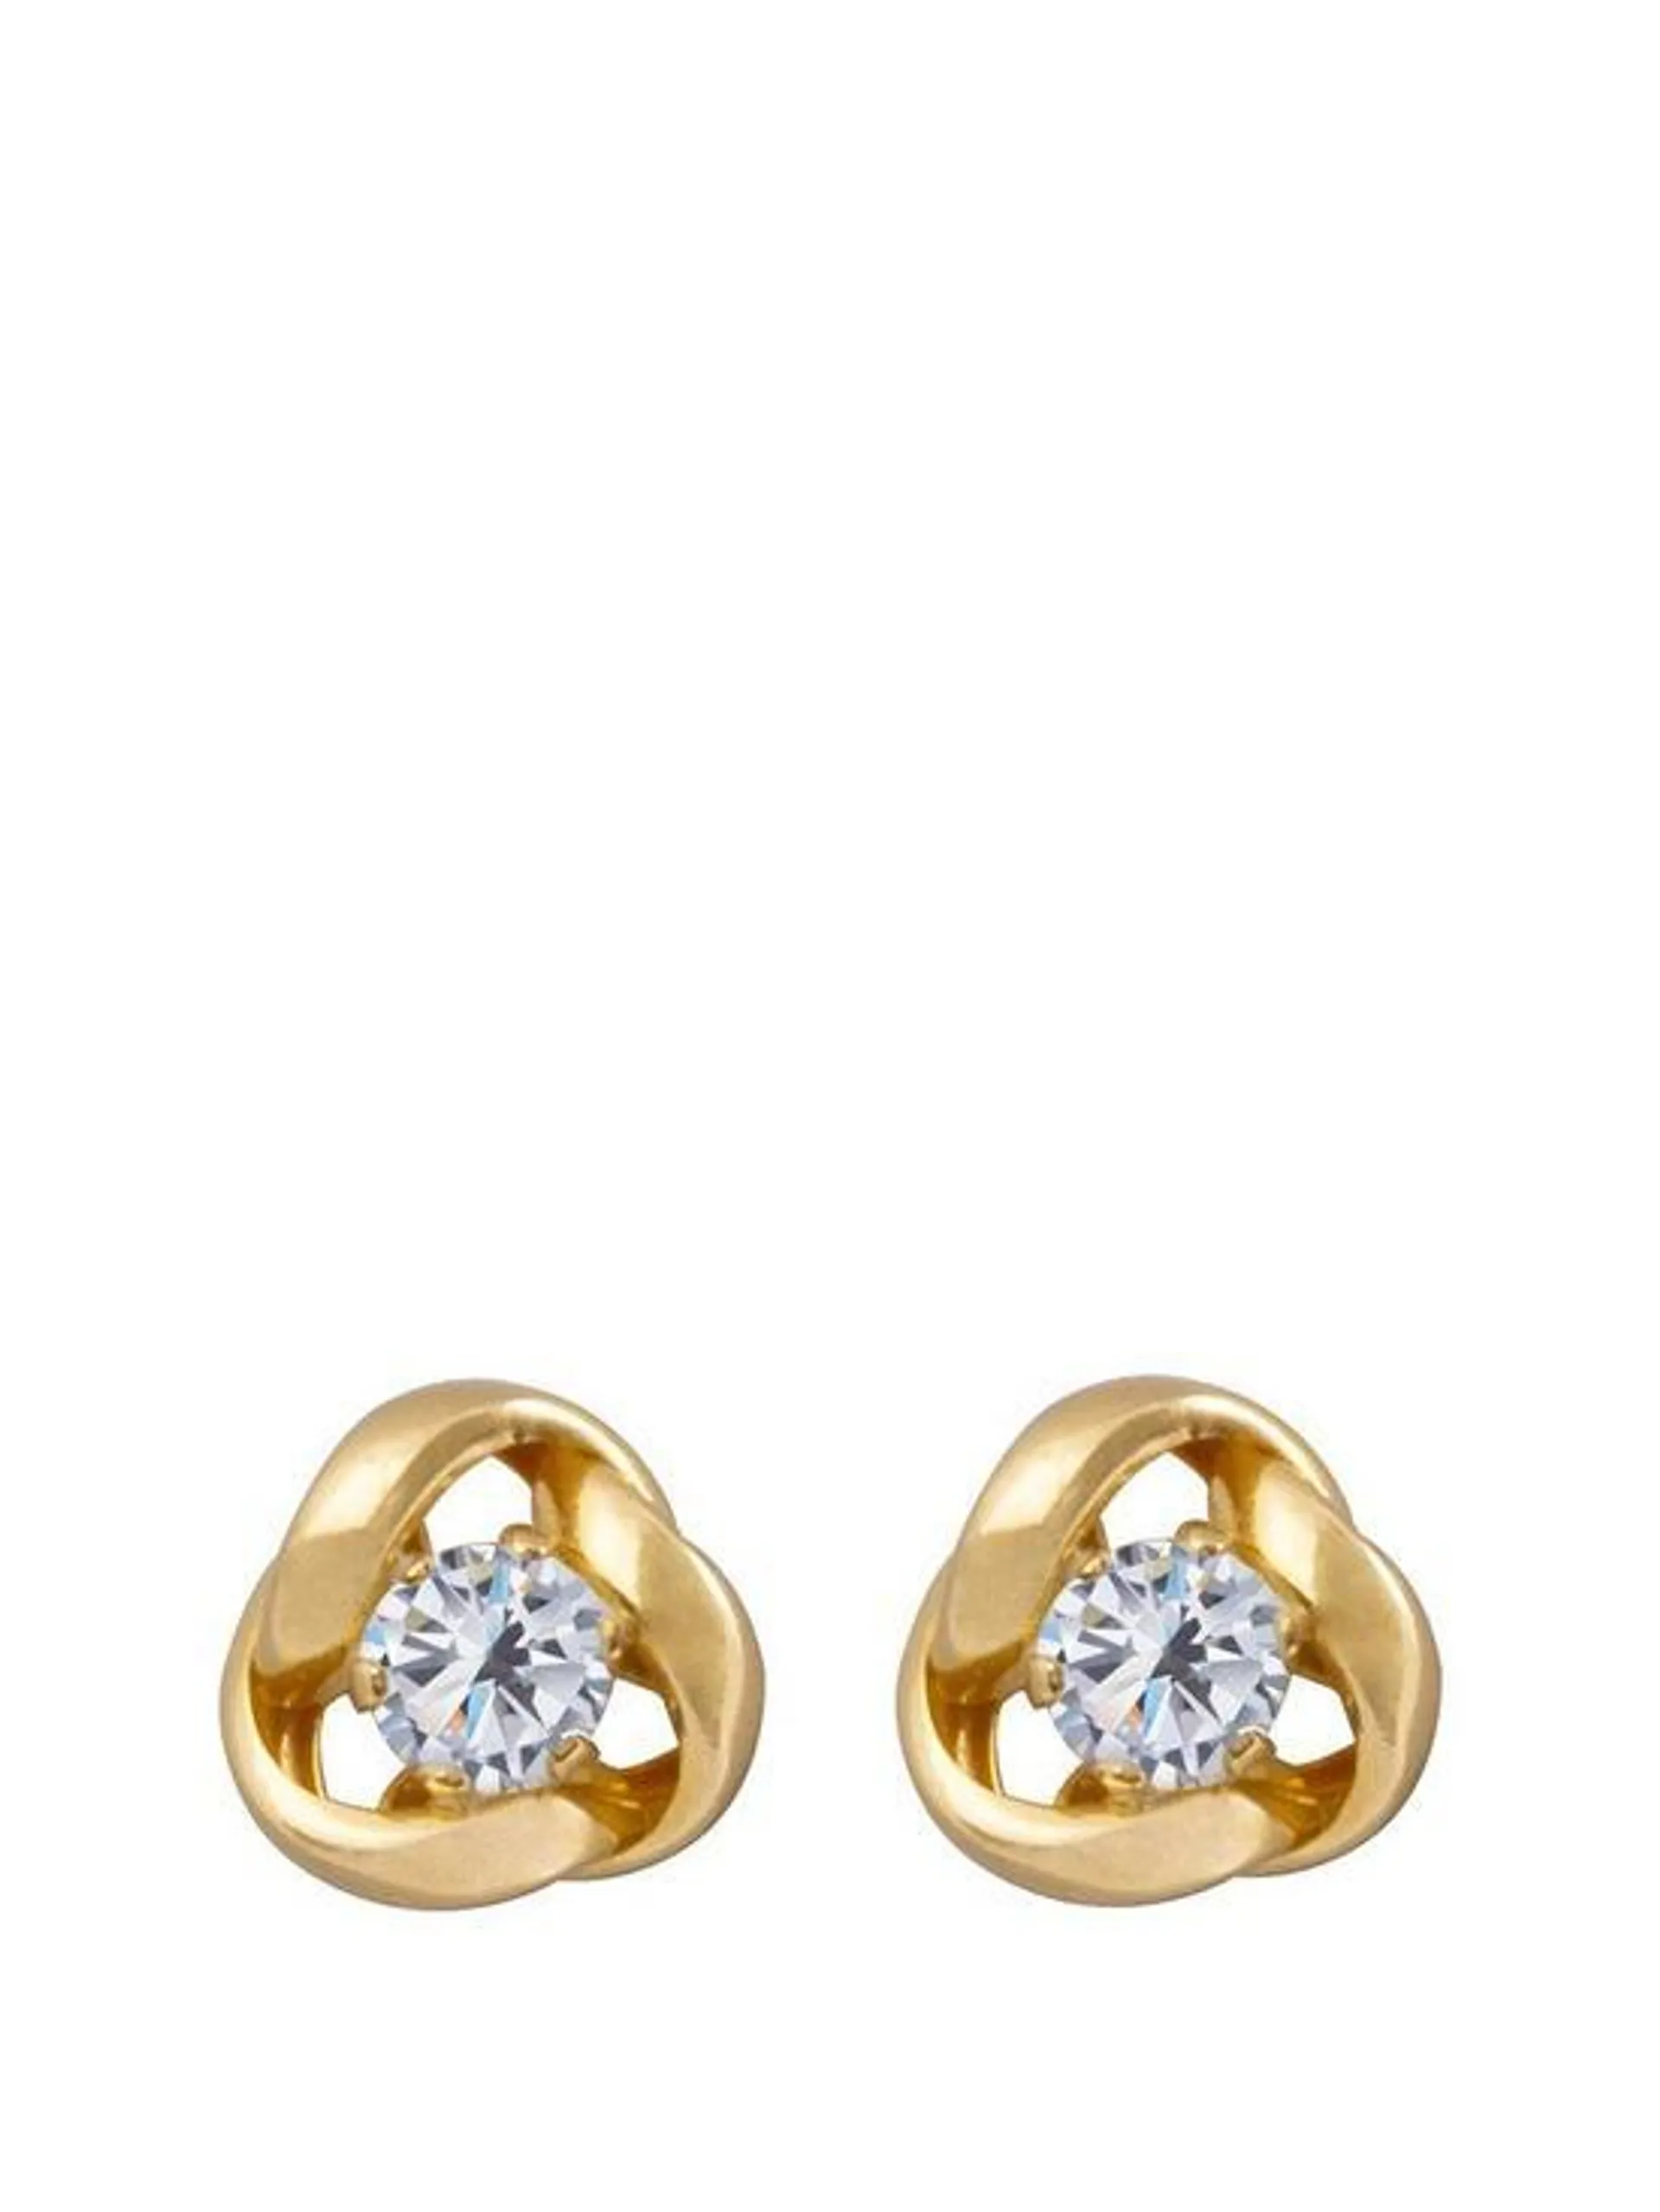 9ct Gold 6.5mm three-way knot studs with 3mm Cubic Zirconia